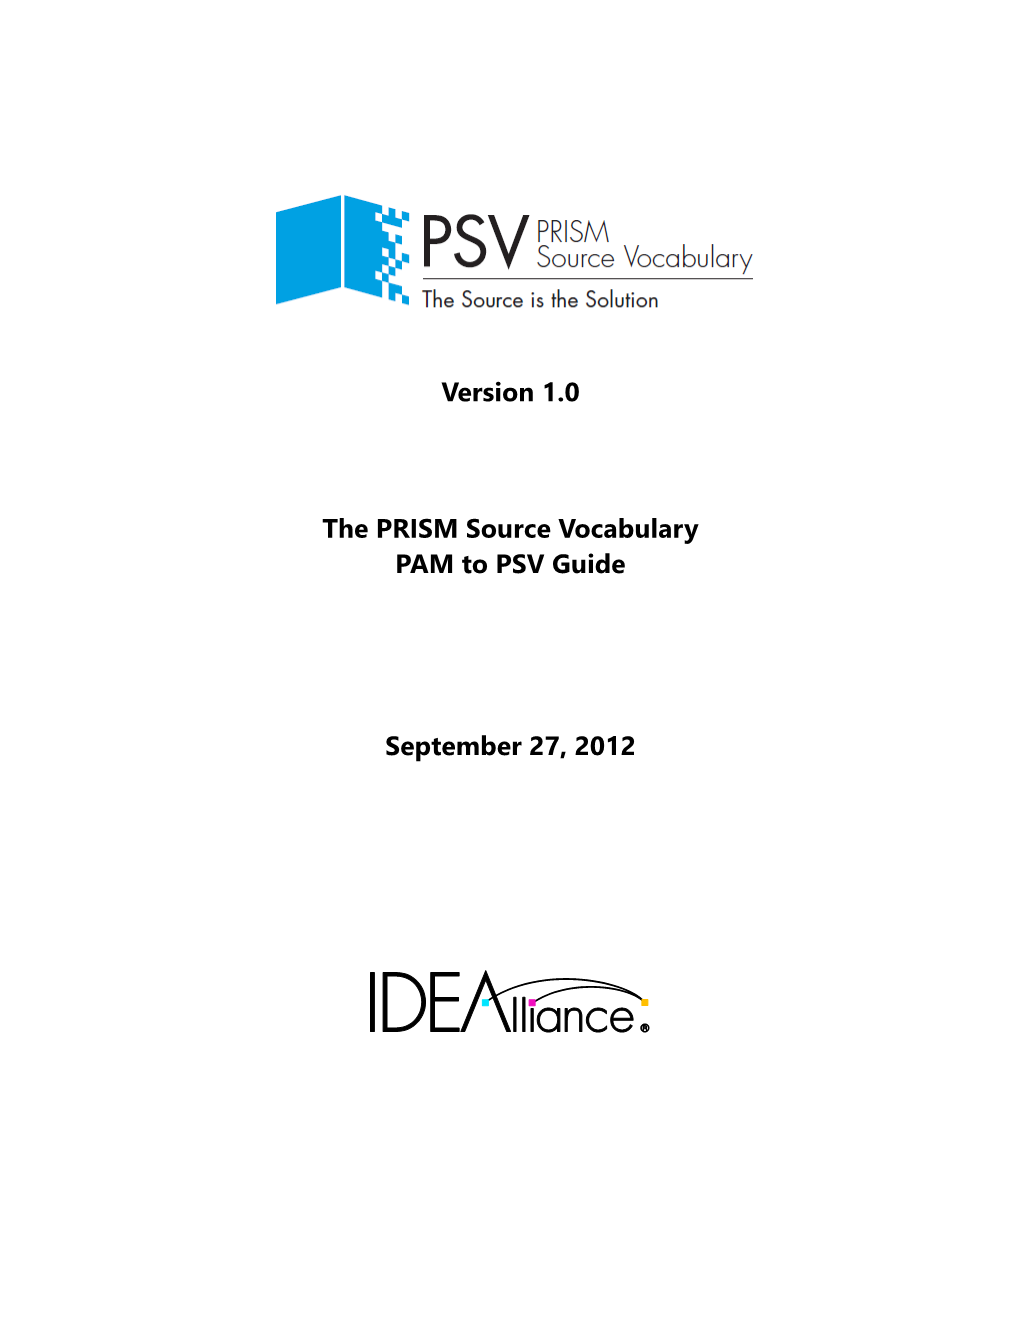 Version 1.0 the PRISM Source Vocabulary PAM to PSV Guide